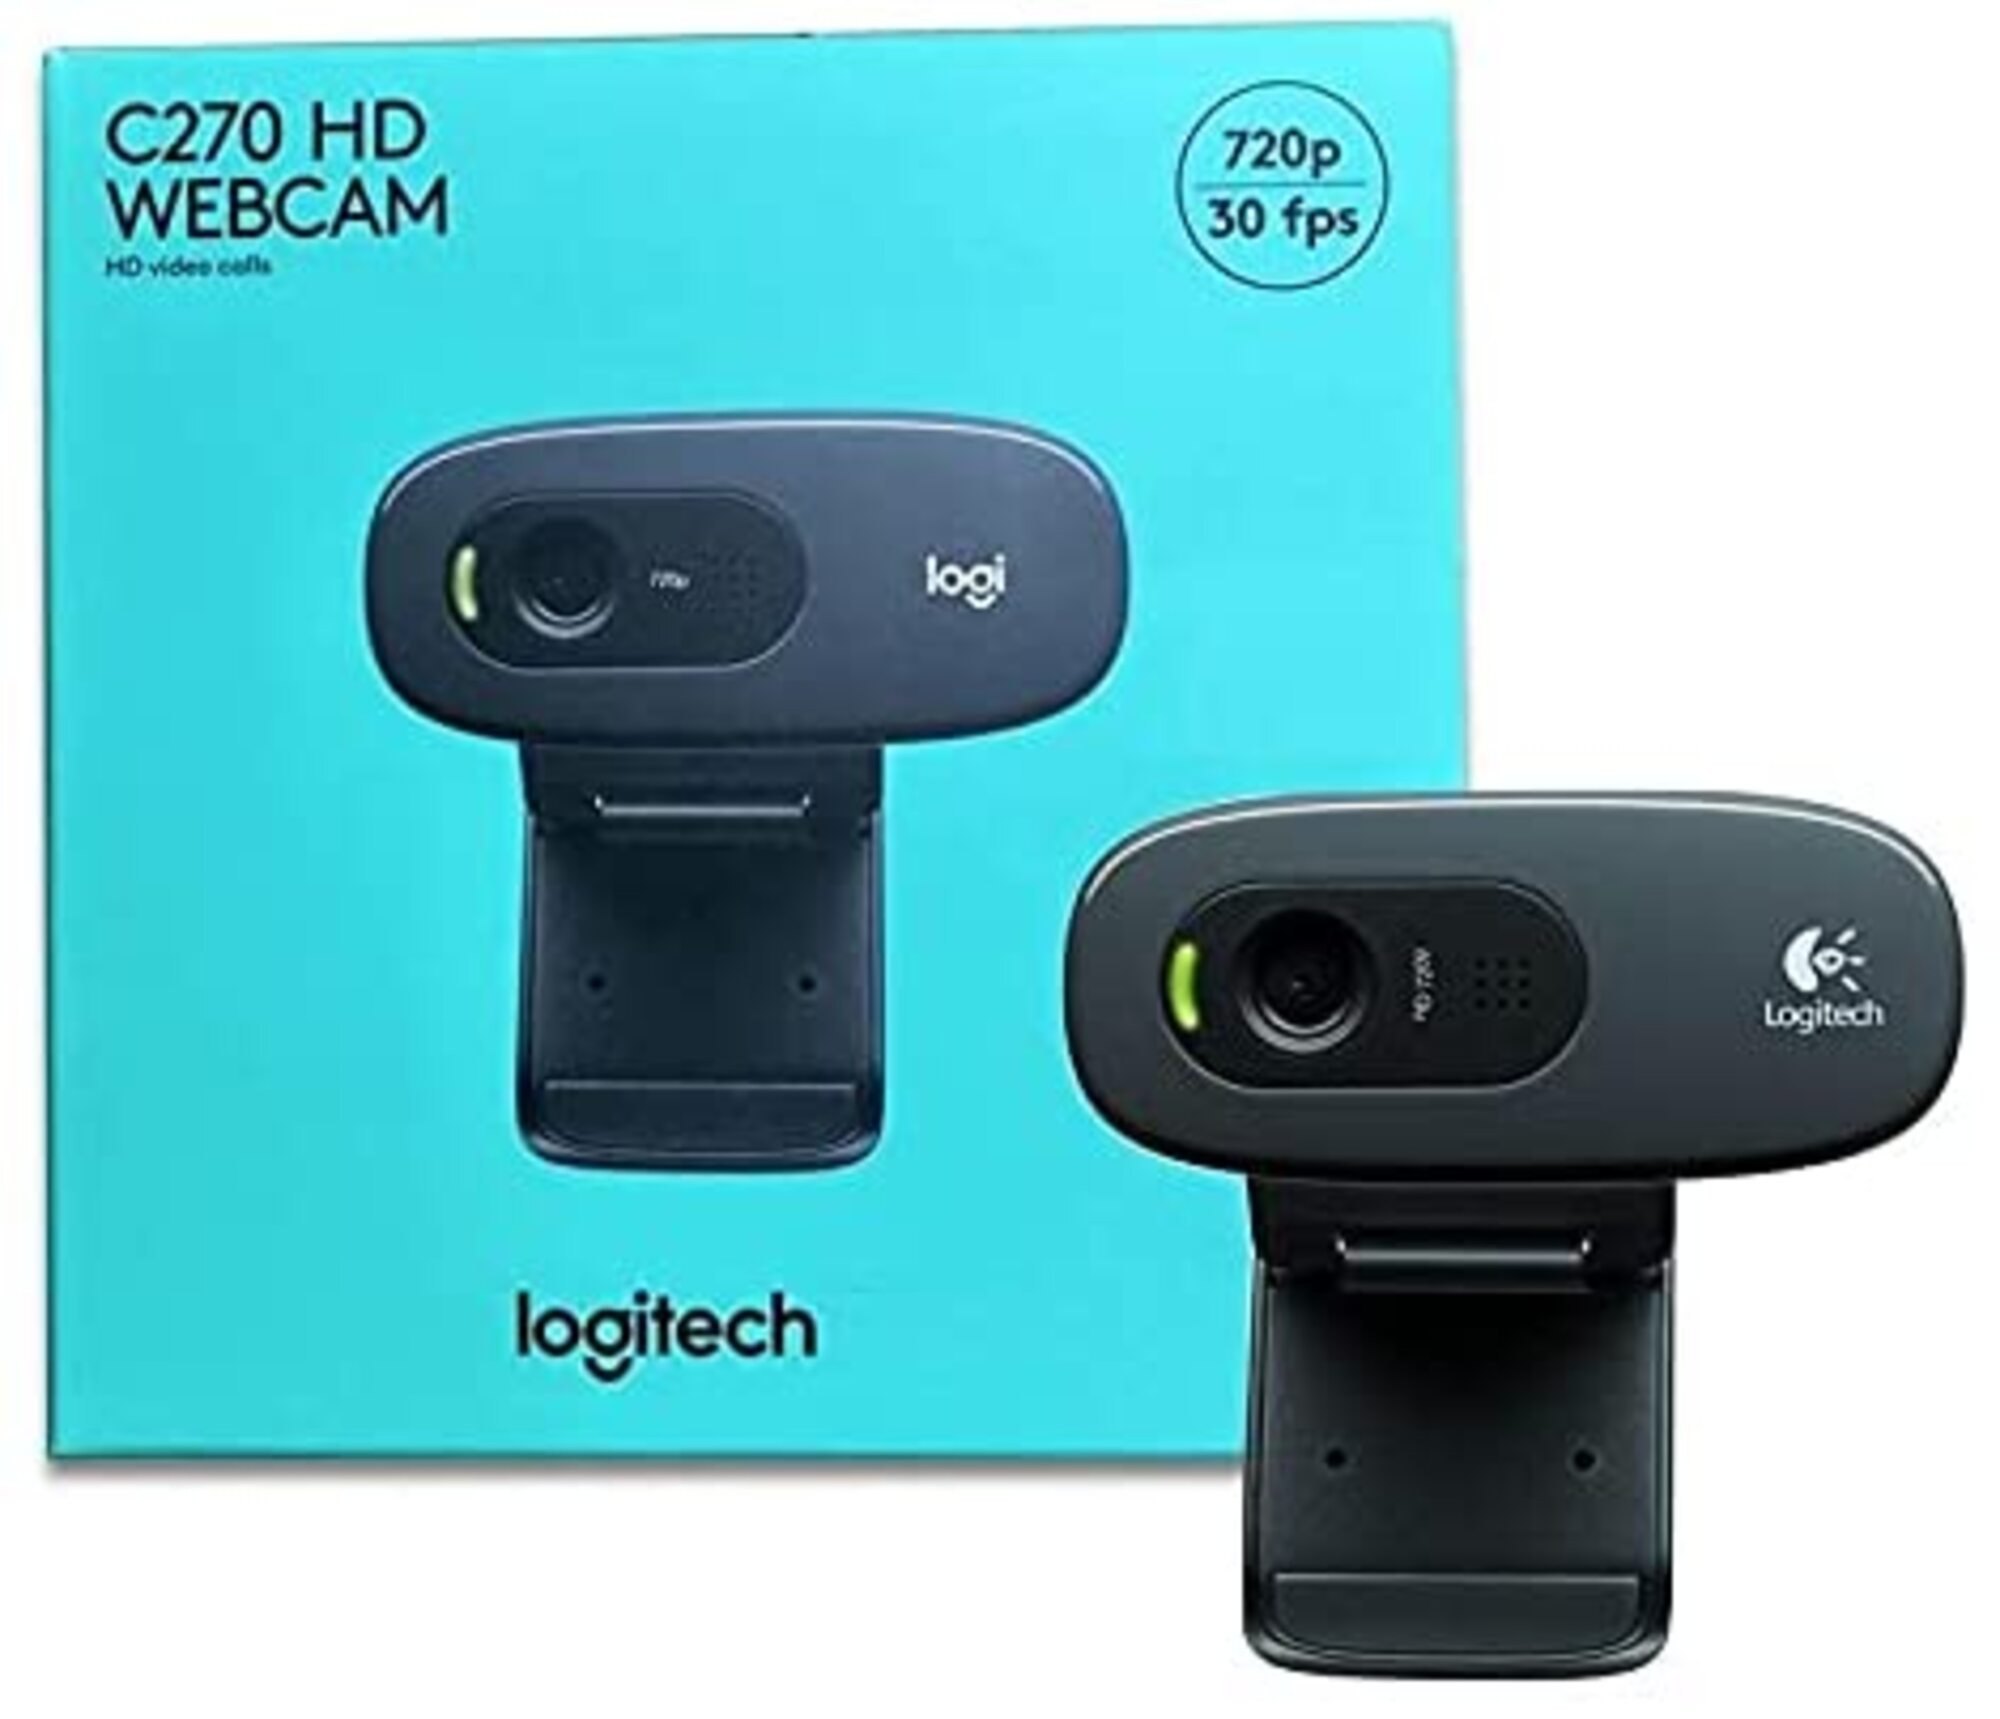 Logitech C270 HD Webcam, 720p Video with Noise Reduction – Canwest Limited